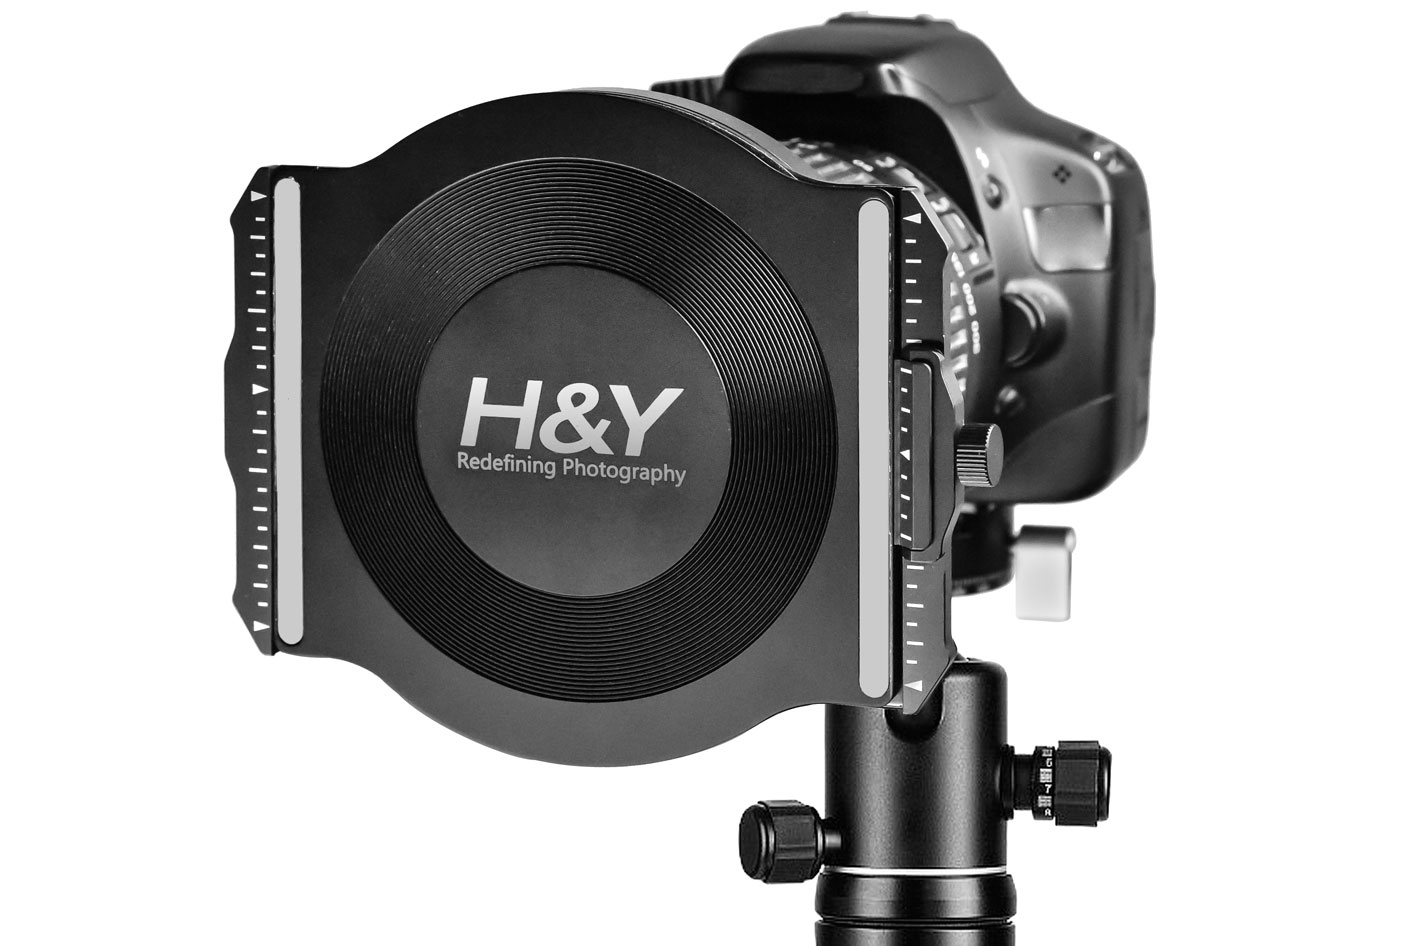 H&Y Filters has a new magnetic cap for its K-series filter system